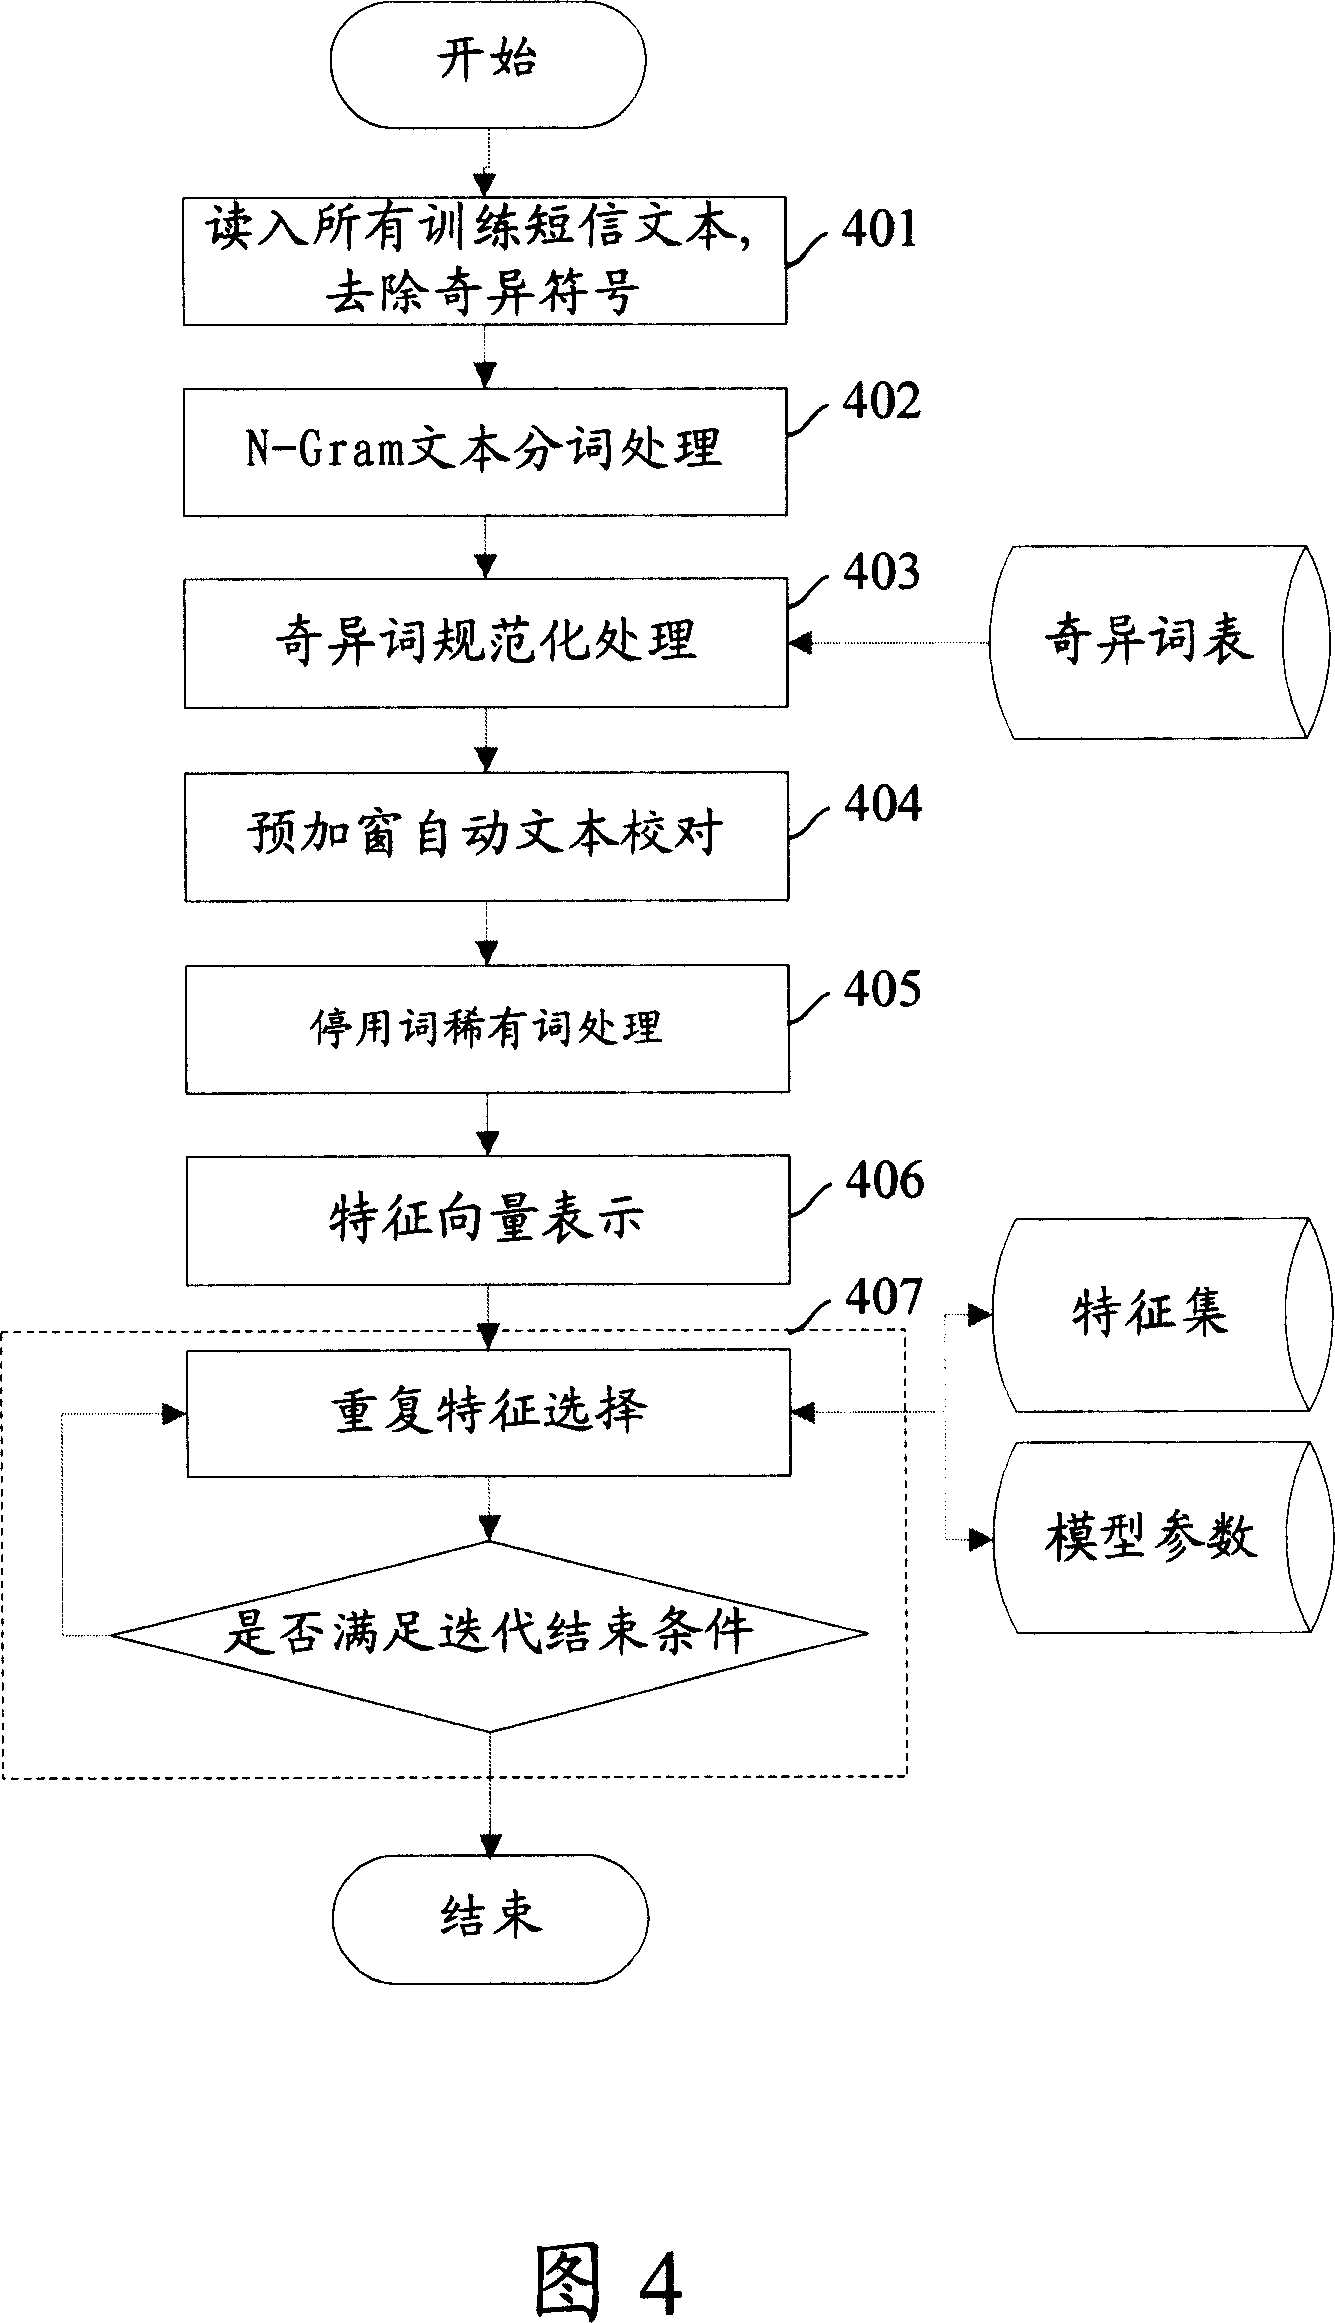 Text handling method and system